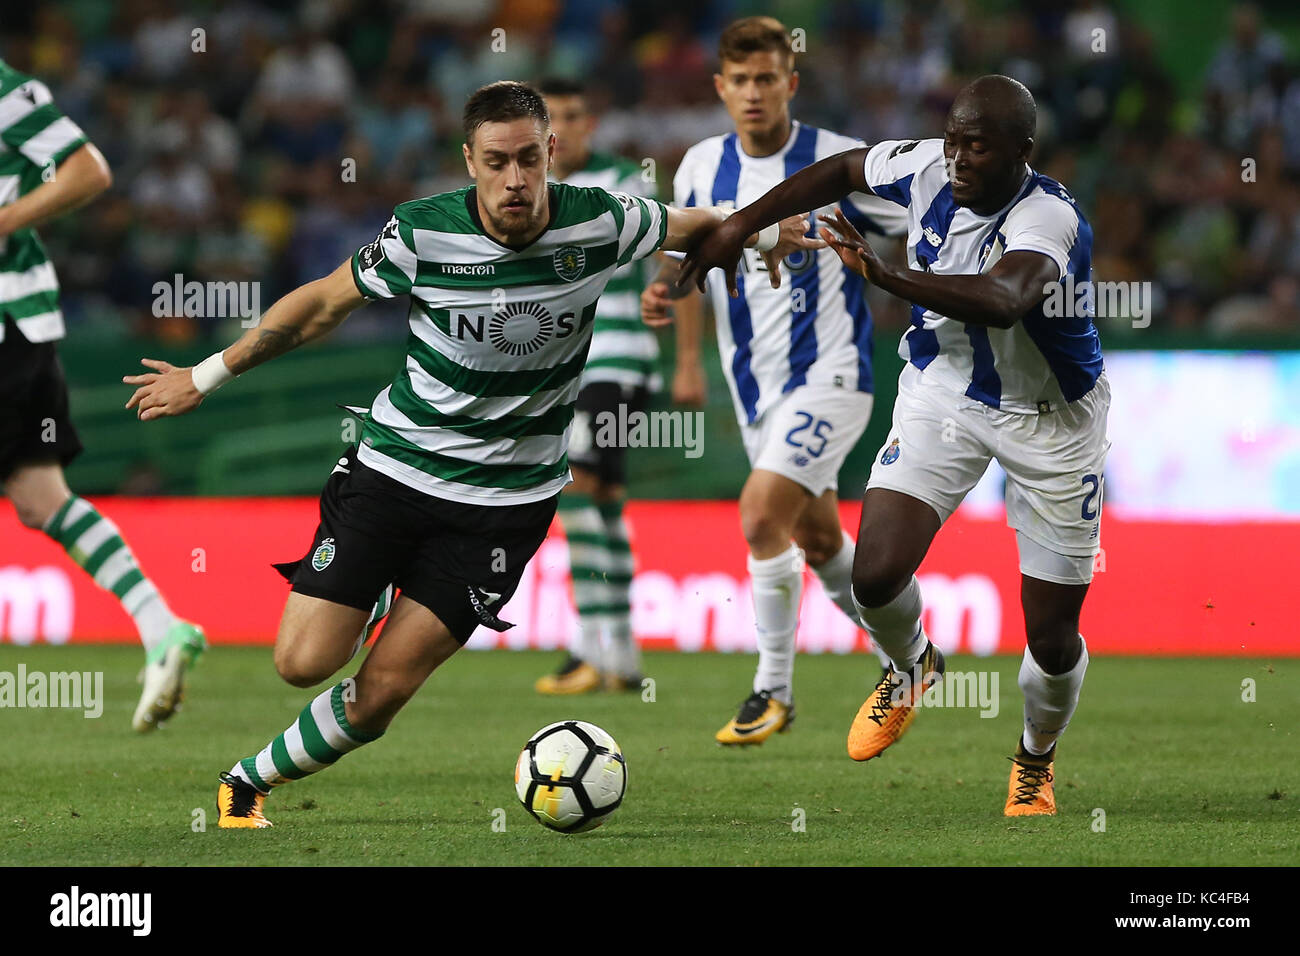 Lisbon, Portugal. 01st Oct, 2017. Sporting«s defender Sebastian Coates from Uruguay (L) and FC PortoÕs midfielder Danilo Pereira from Portugal (R) during Premier League 2017/18 match between Sporting CP and FC Porto, at Alvalade Stadium in Lisbon on October 1, 2017. (Photo by Bruno Barros / DPI) Credit: Bruno Barros/Alamy Live News Stock Photo